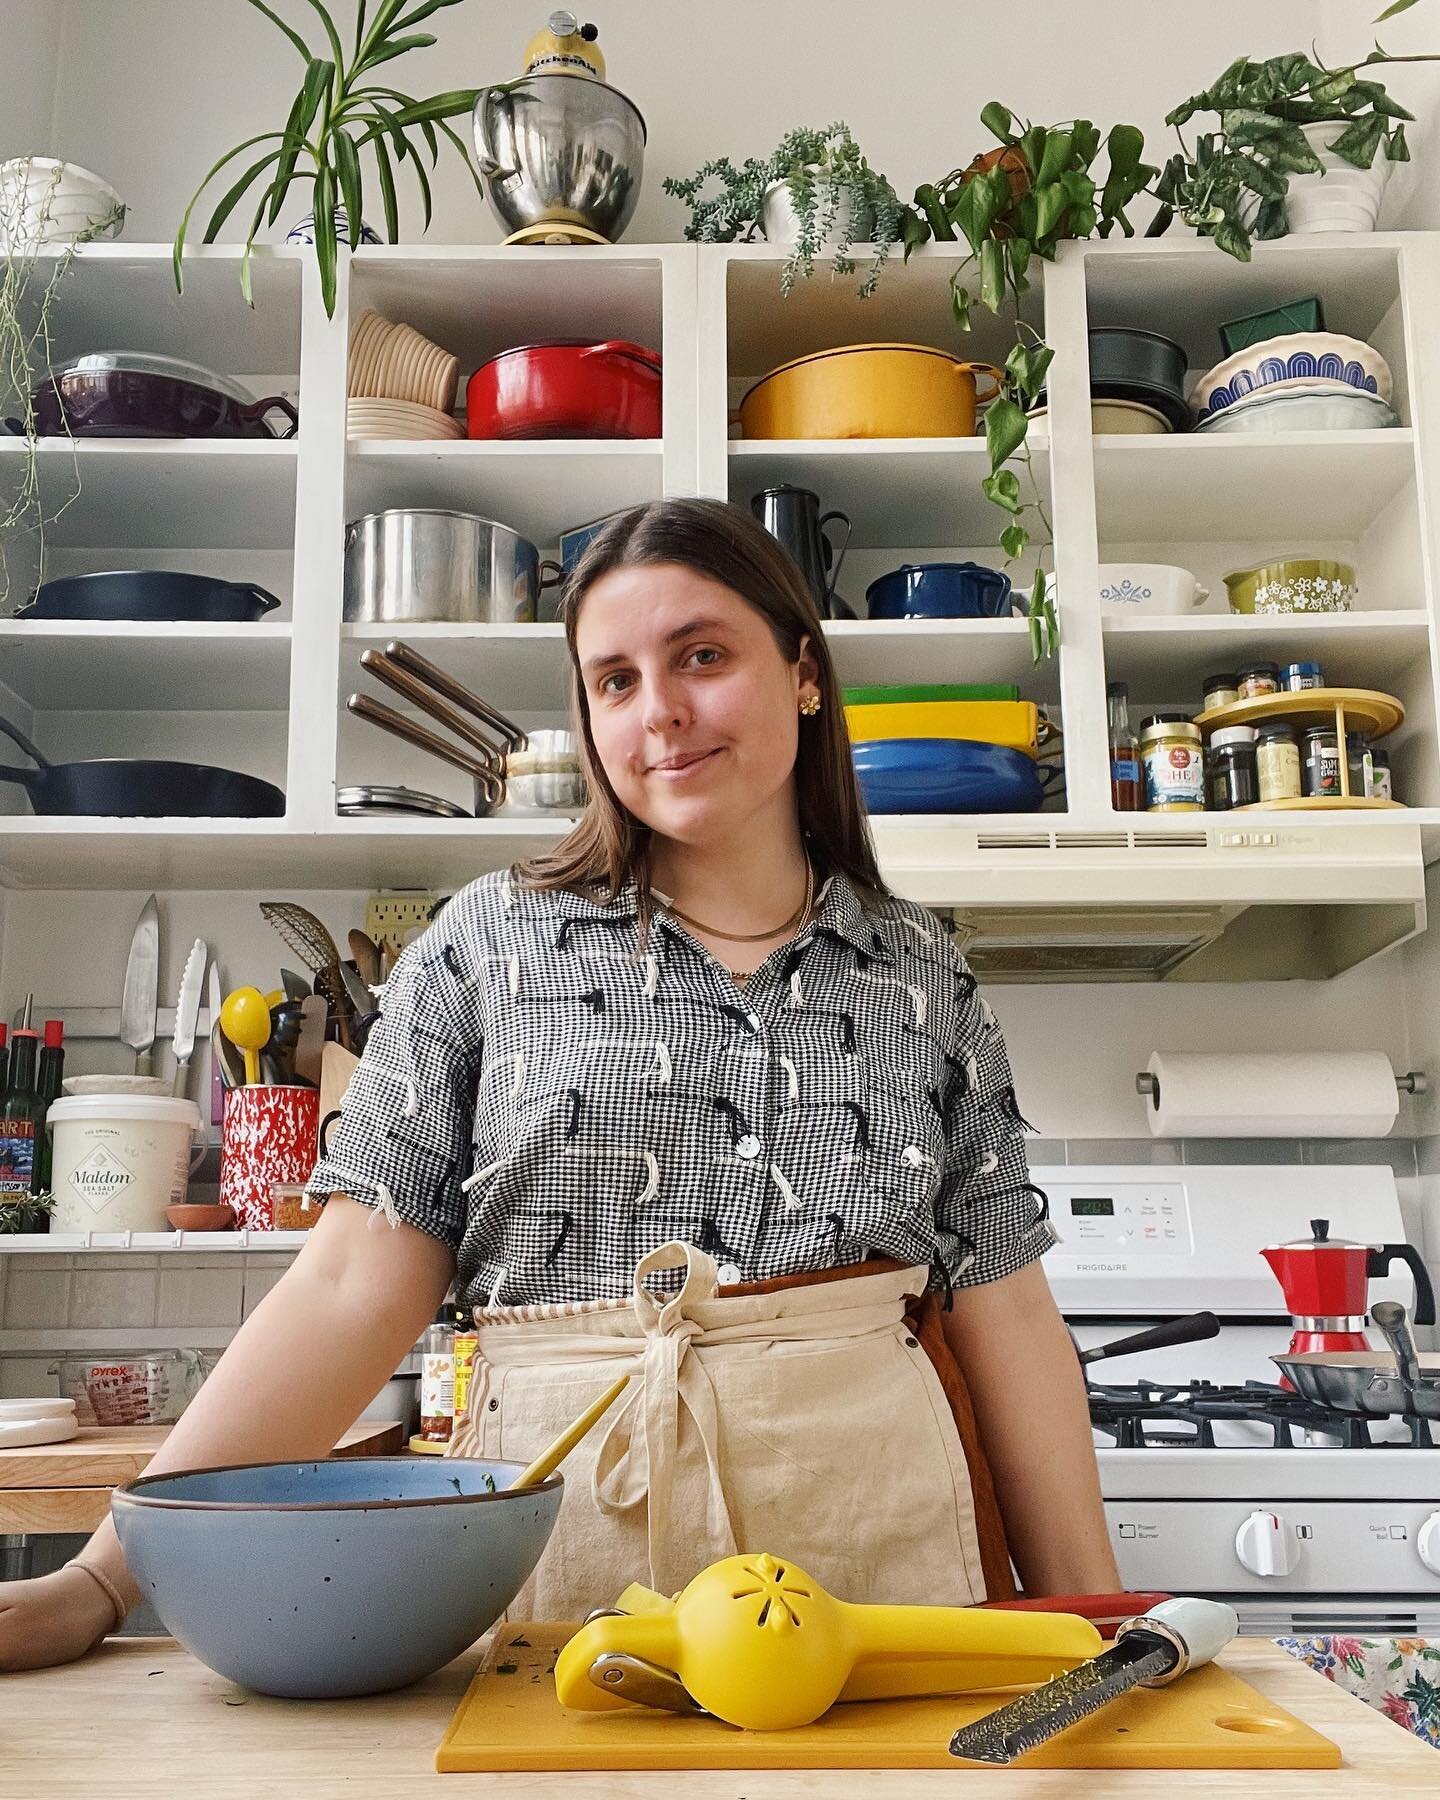 (re)introducing.... the JCFY newsletter! 🥳 there&rsquo;s been a lot of cooking going on in this little kitchen and I&rsquo;m excited to share it with y&rsquo;all 🌸 for paying subscribers, every Monday, I&rsquo;ll be sending out the Recipe Box, whic